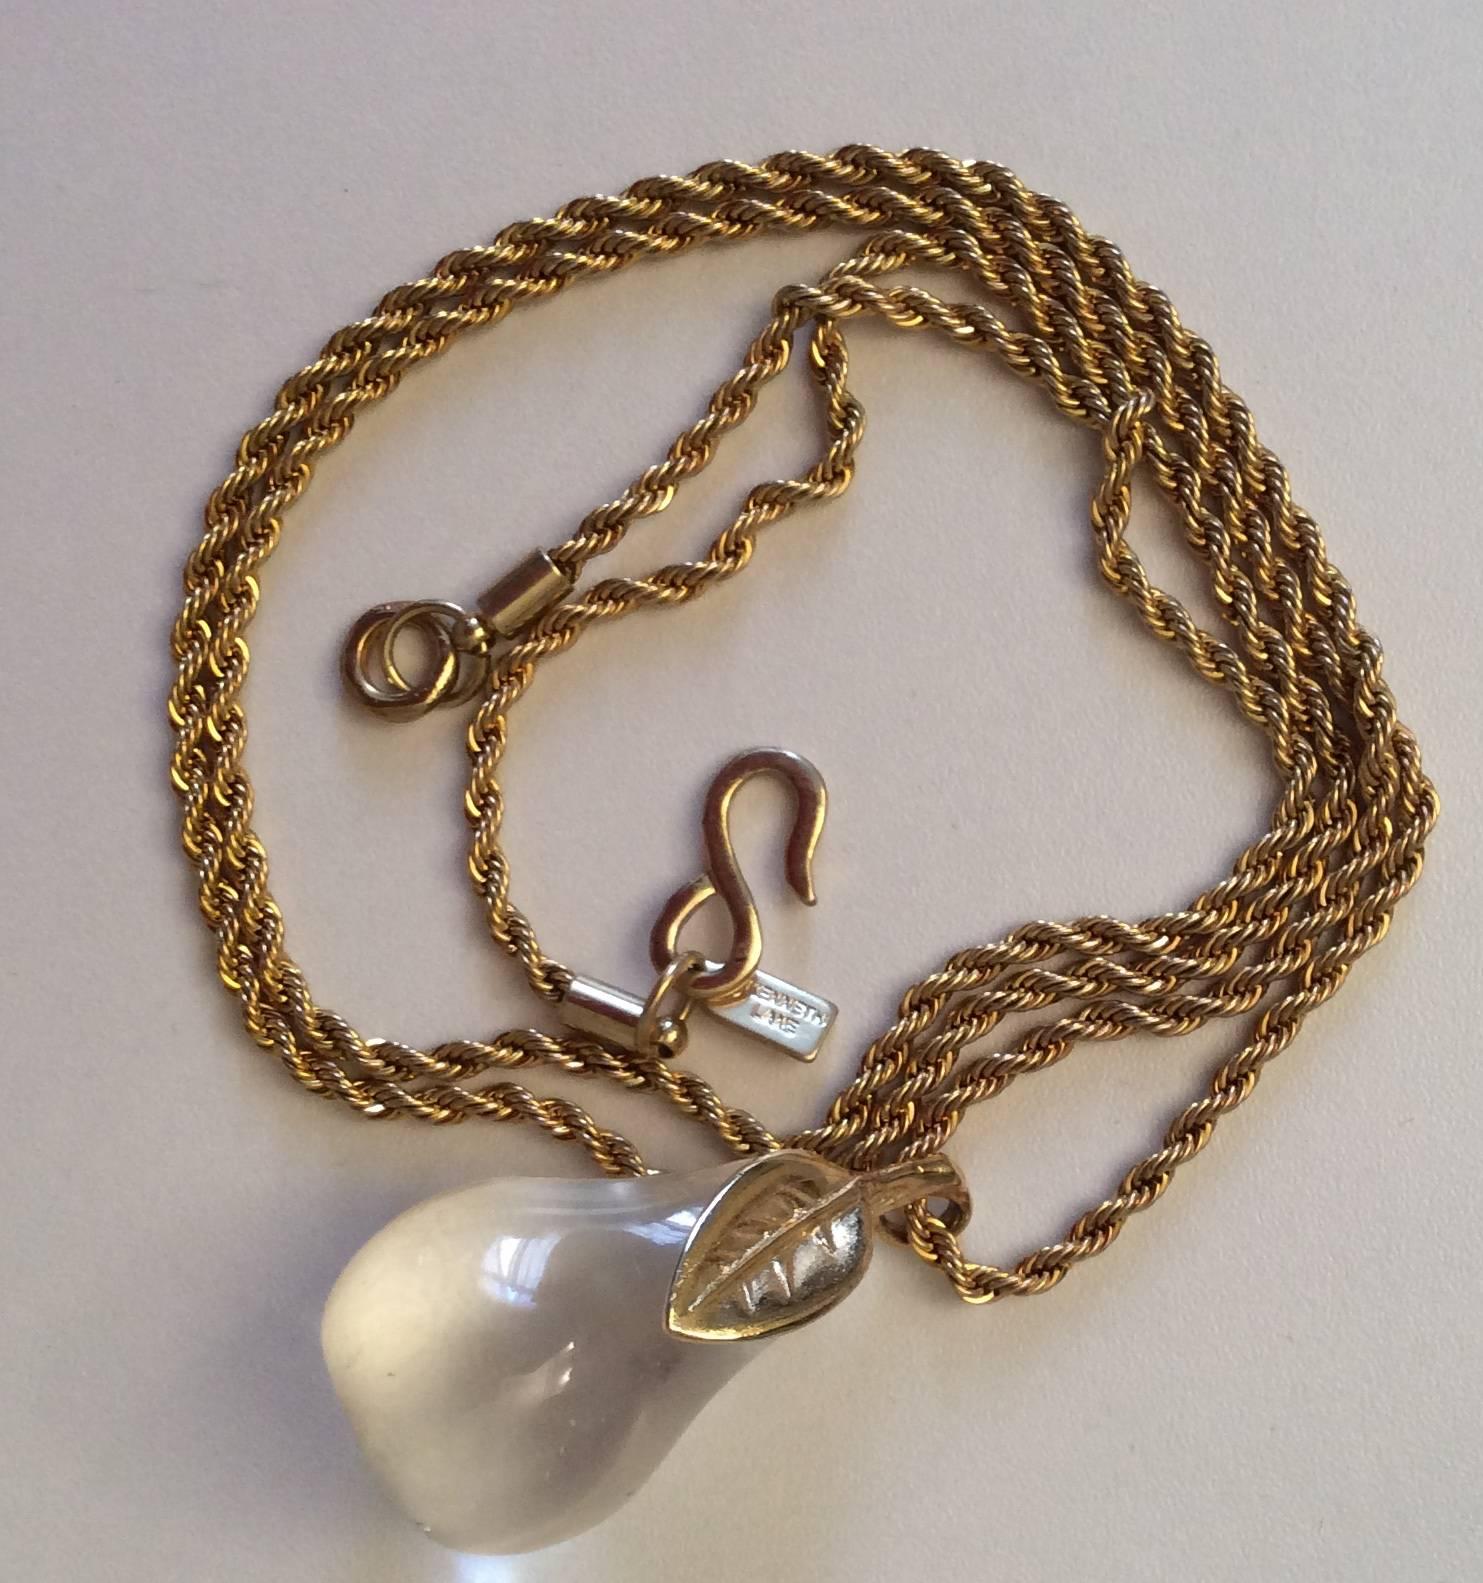 Presented here is a Kenneth J. Lane (KJL) lucite pear necklace. The lucite pear has two gold tone leaves and hangs from a 32 inch gold tone necklace. The necklace has a Kenneth J. Lane tag. It appears to have never been worn. I'm not sure of the